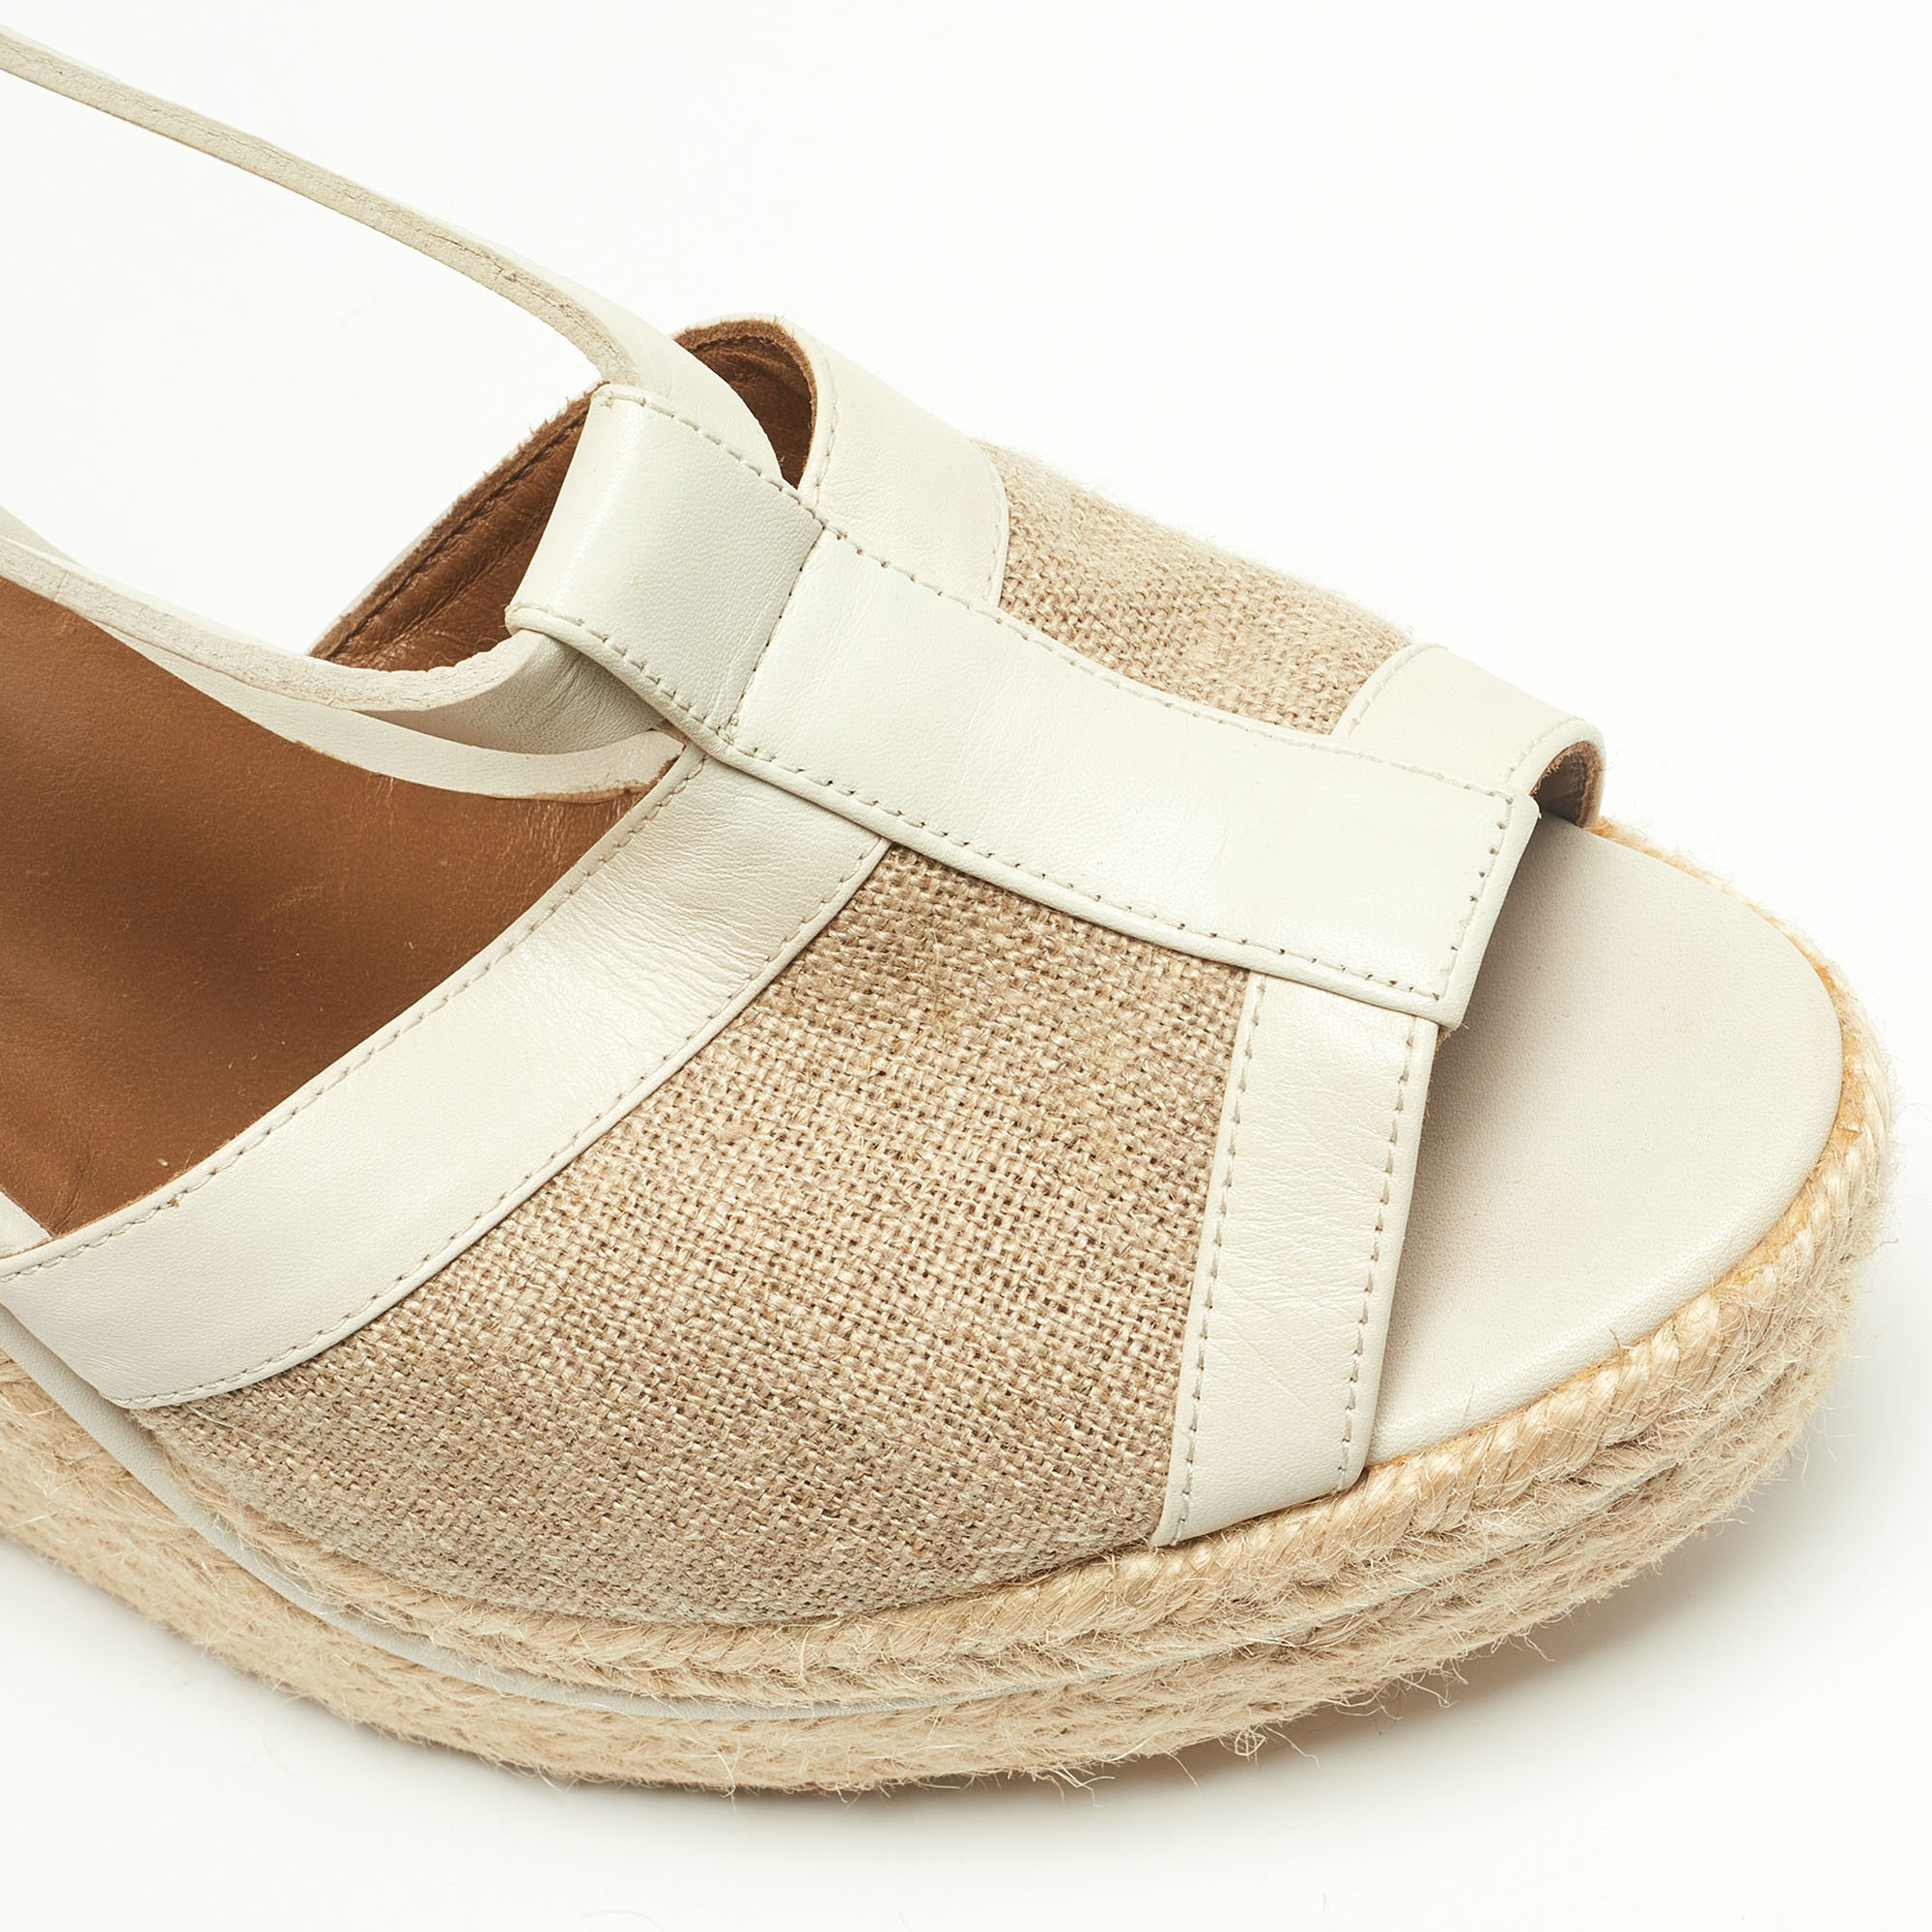 Hermes White/Beige Leather And Canvas Ibiza Espadrille Wedge Sandals Size 39